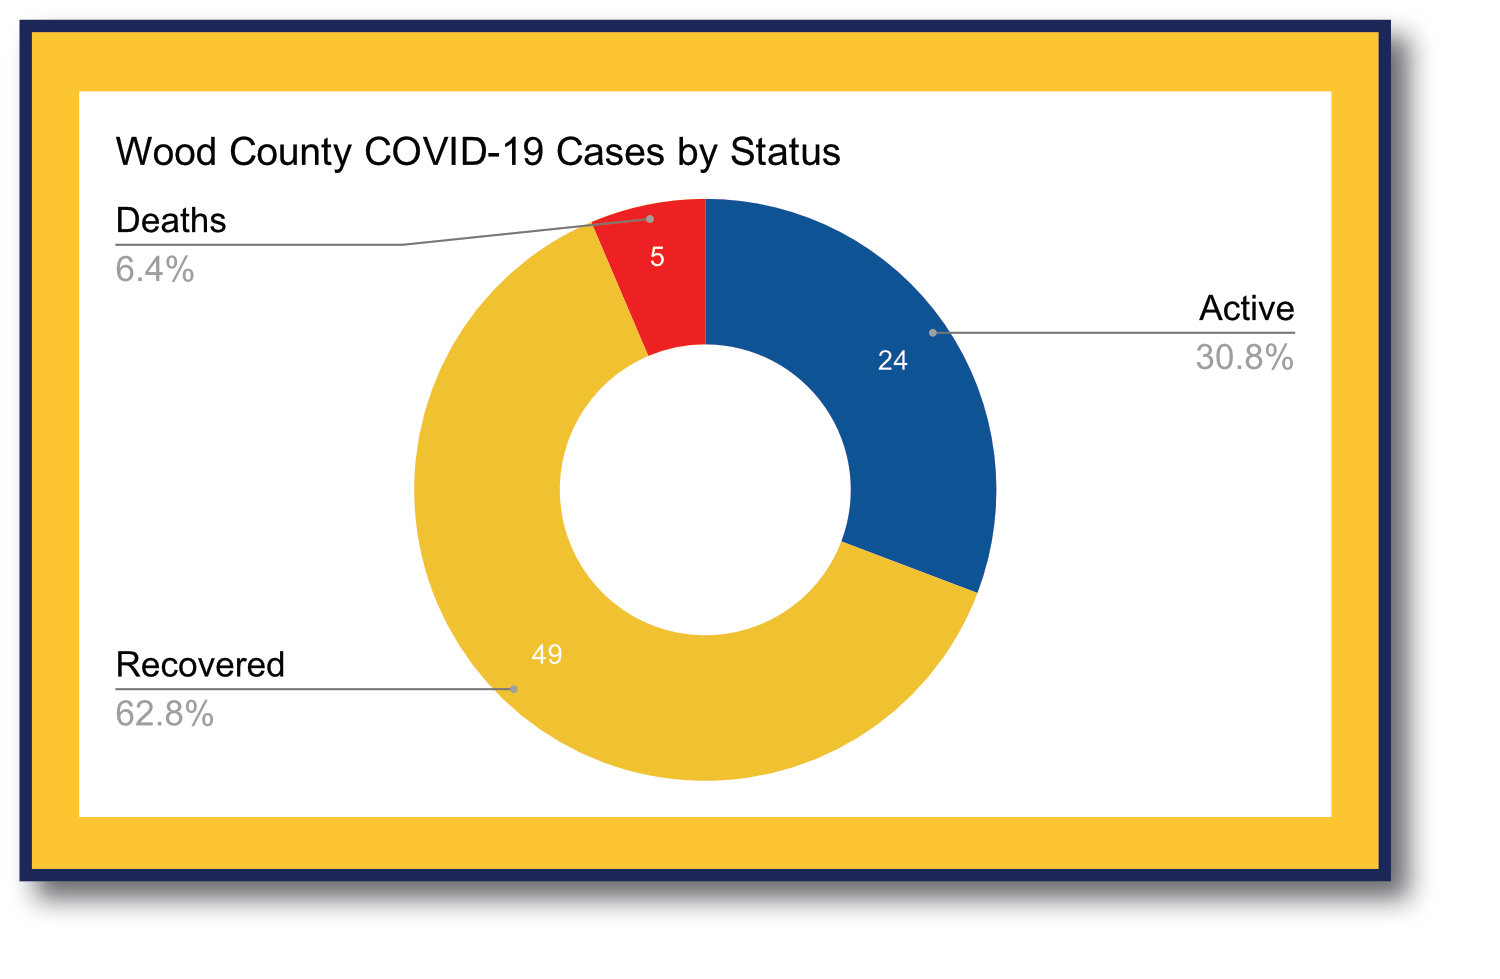 Of 78 cases in Wood County, 62.8% have recovered, 30.8% remain active, and 6.4% have died of COVID-19.